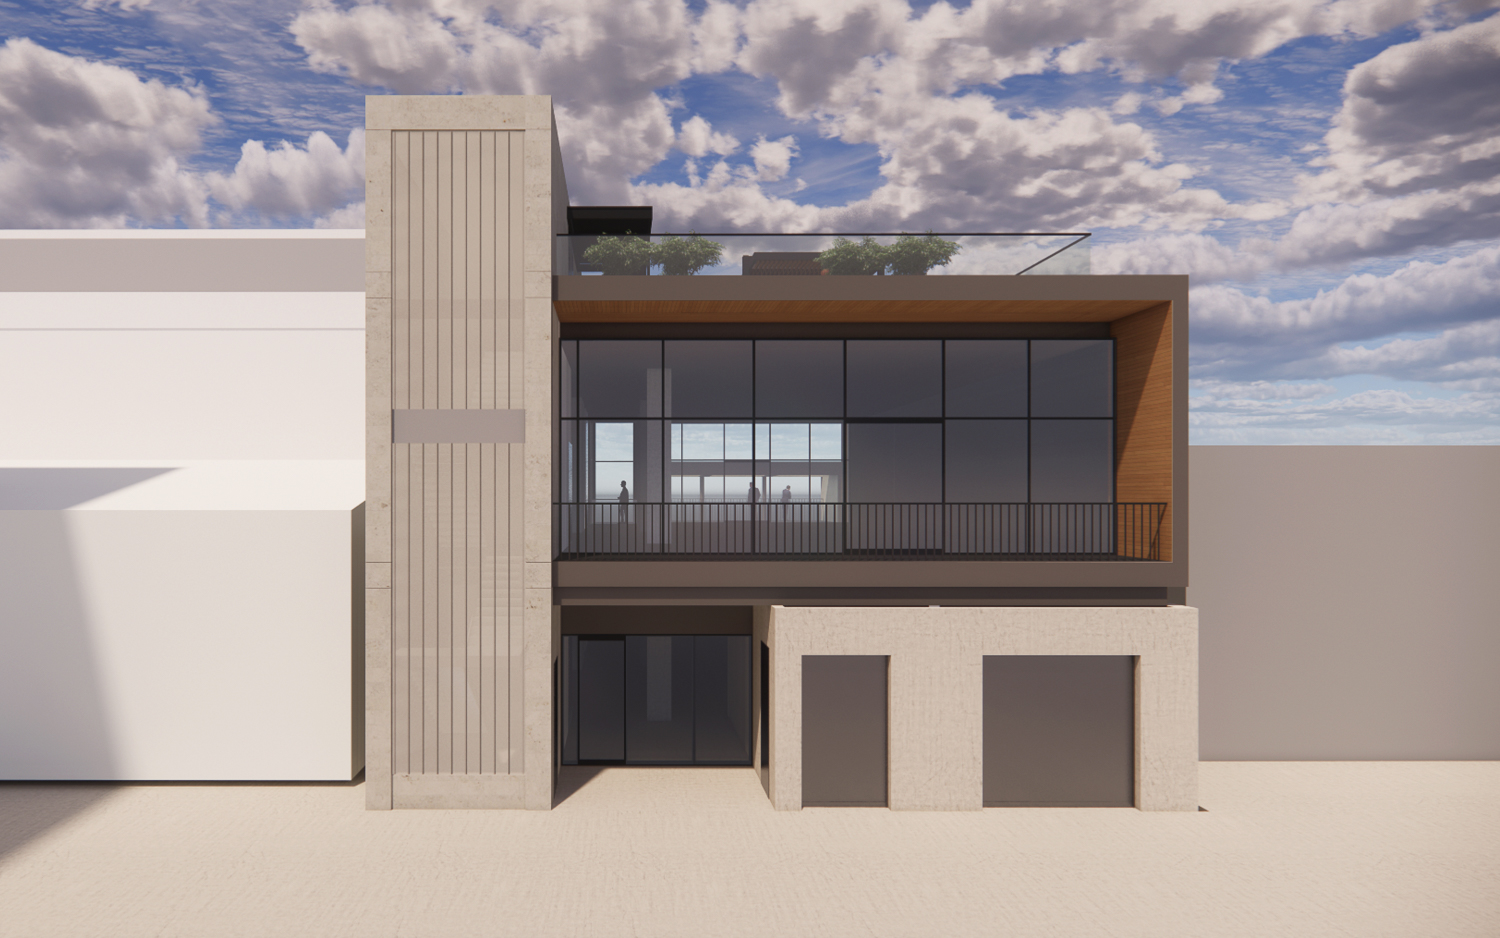 616 Ramona Street rear view, rendering by Hayes Group Architects